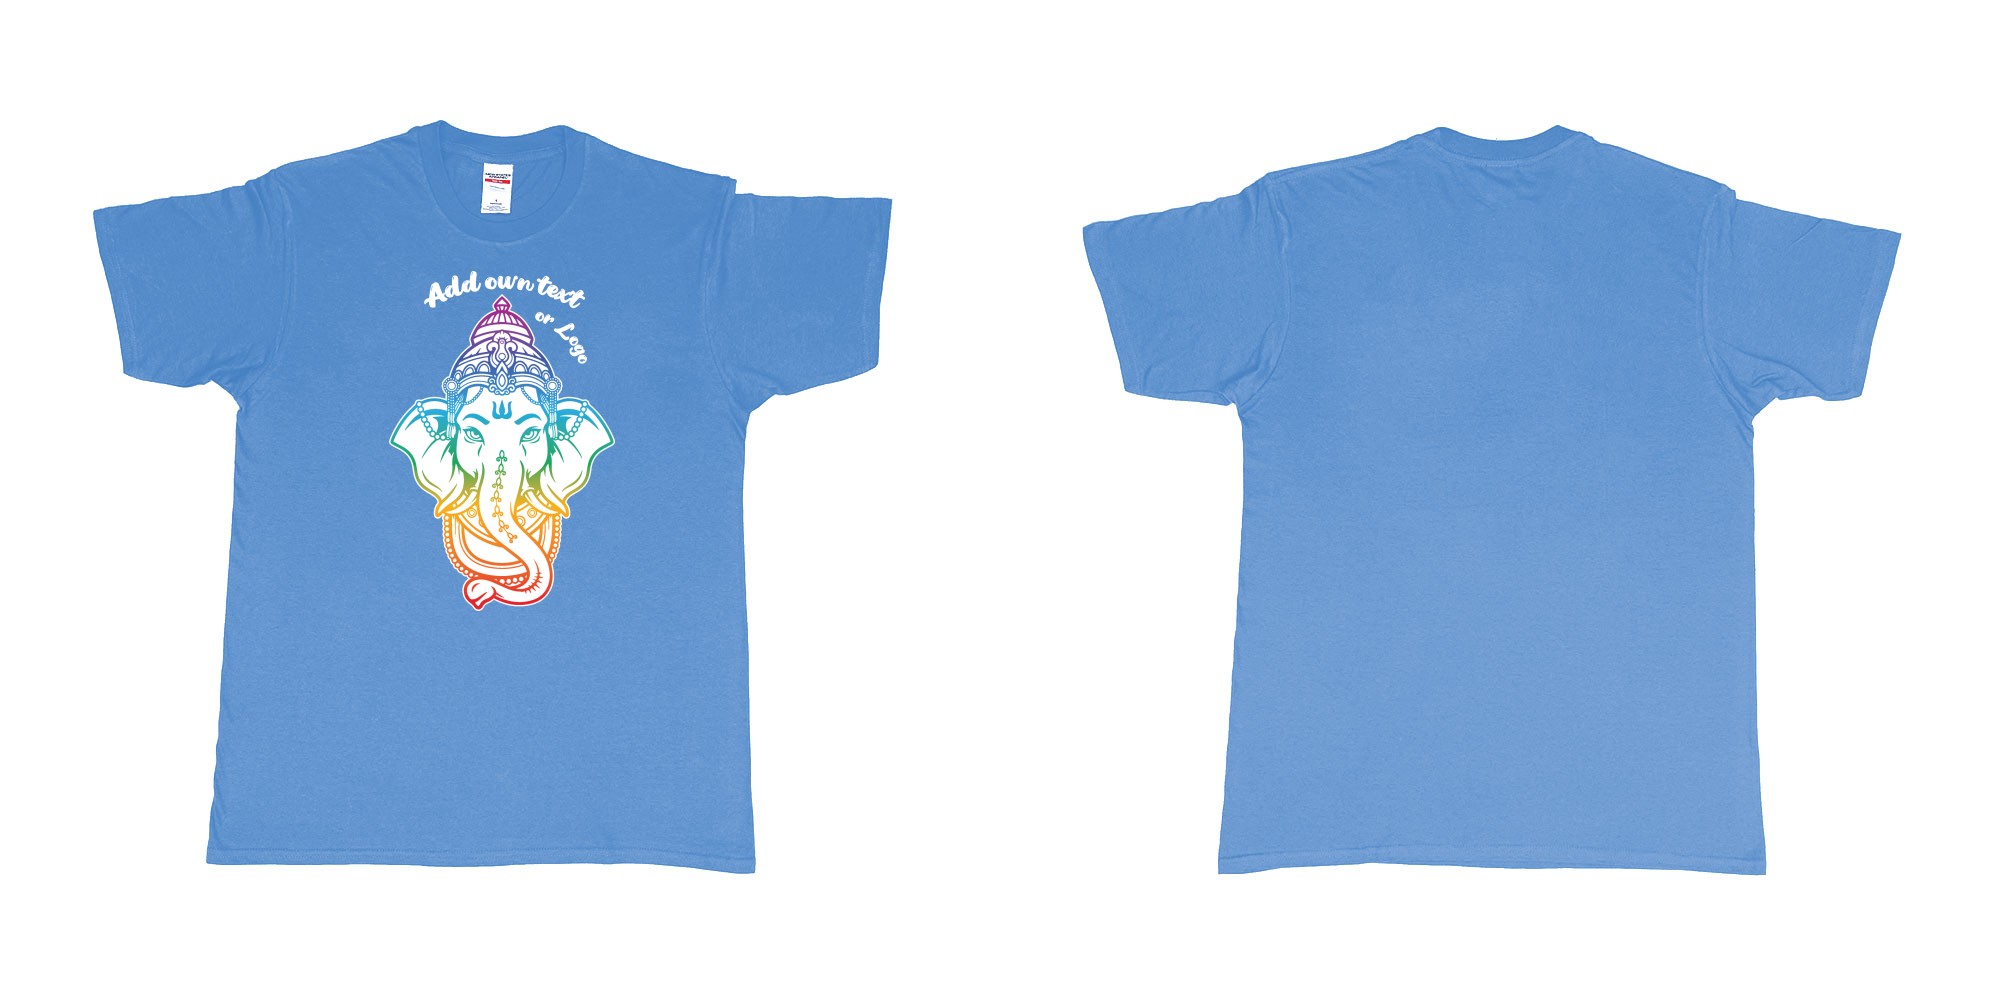 Custom tshirt design ganesha rainbow custom printing in fabric color carolina-blue choice your own text made in Bali by The Pirate Way